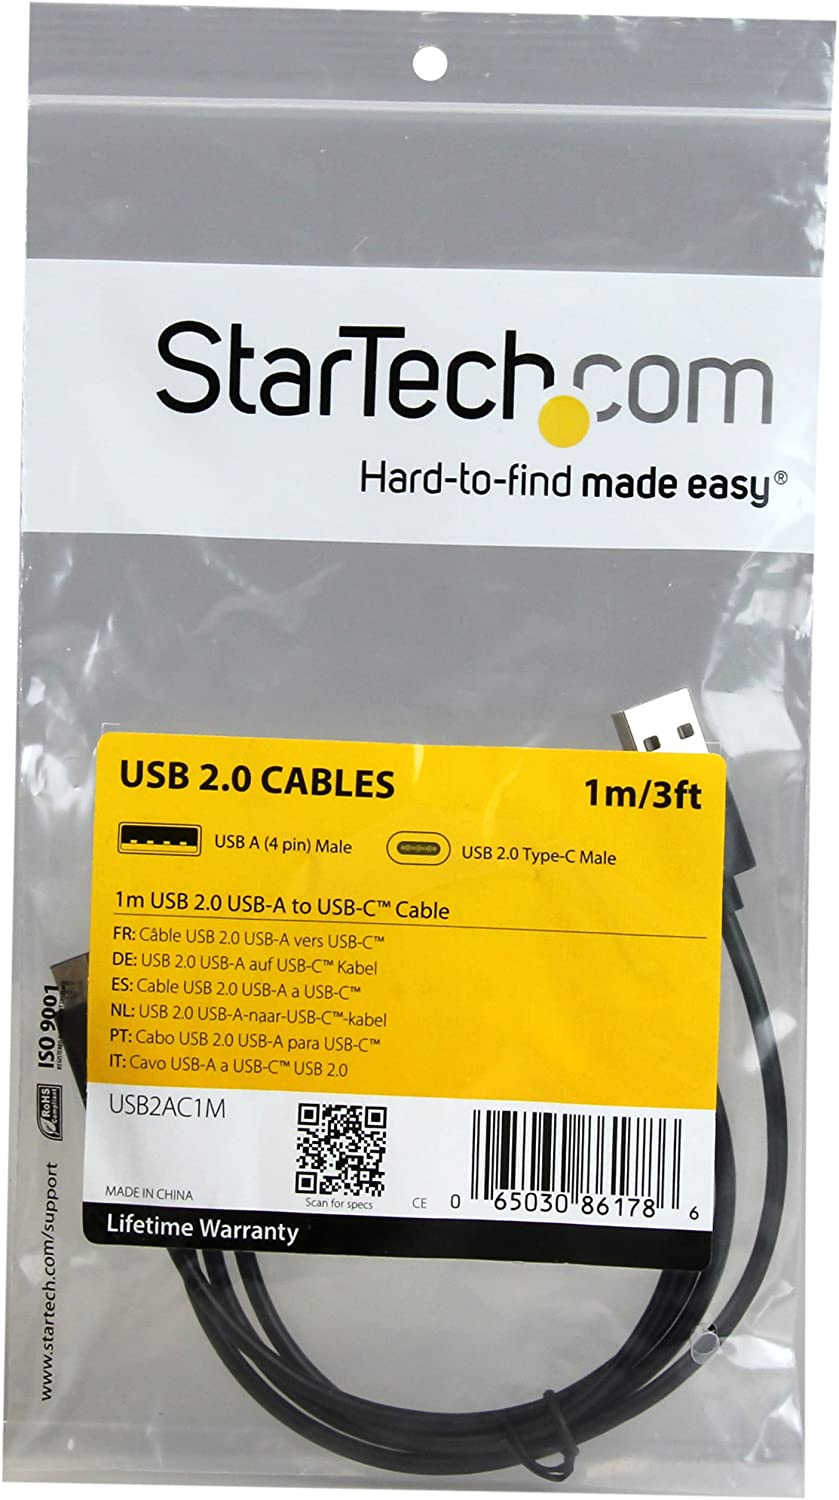 StarTech.com USB C to USB Cable - 3 ft / 1m - USB A to C - USB 2.0 Cable - USB Adapter Cable - USB Type C - USB-C Cable (USB2AC1M),Black 1m 1 Pack